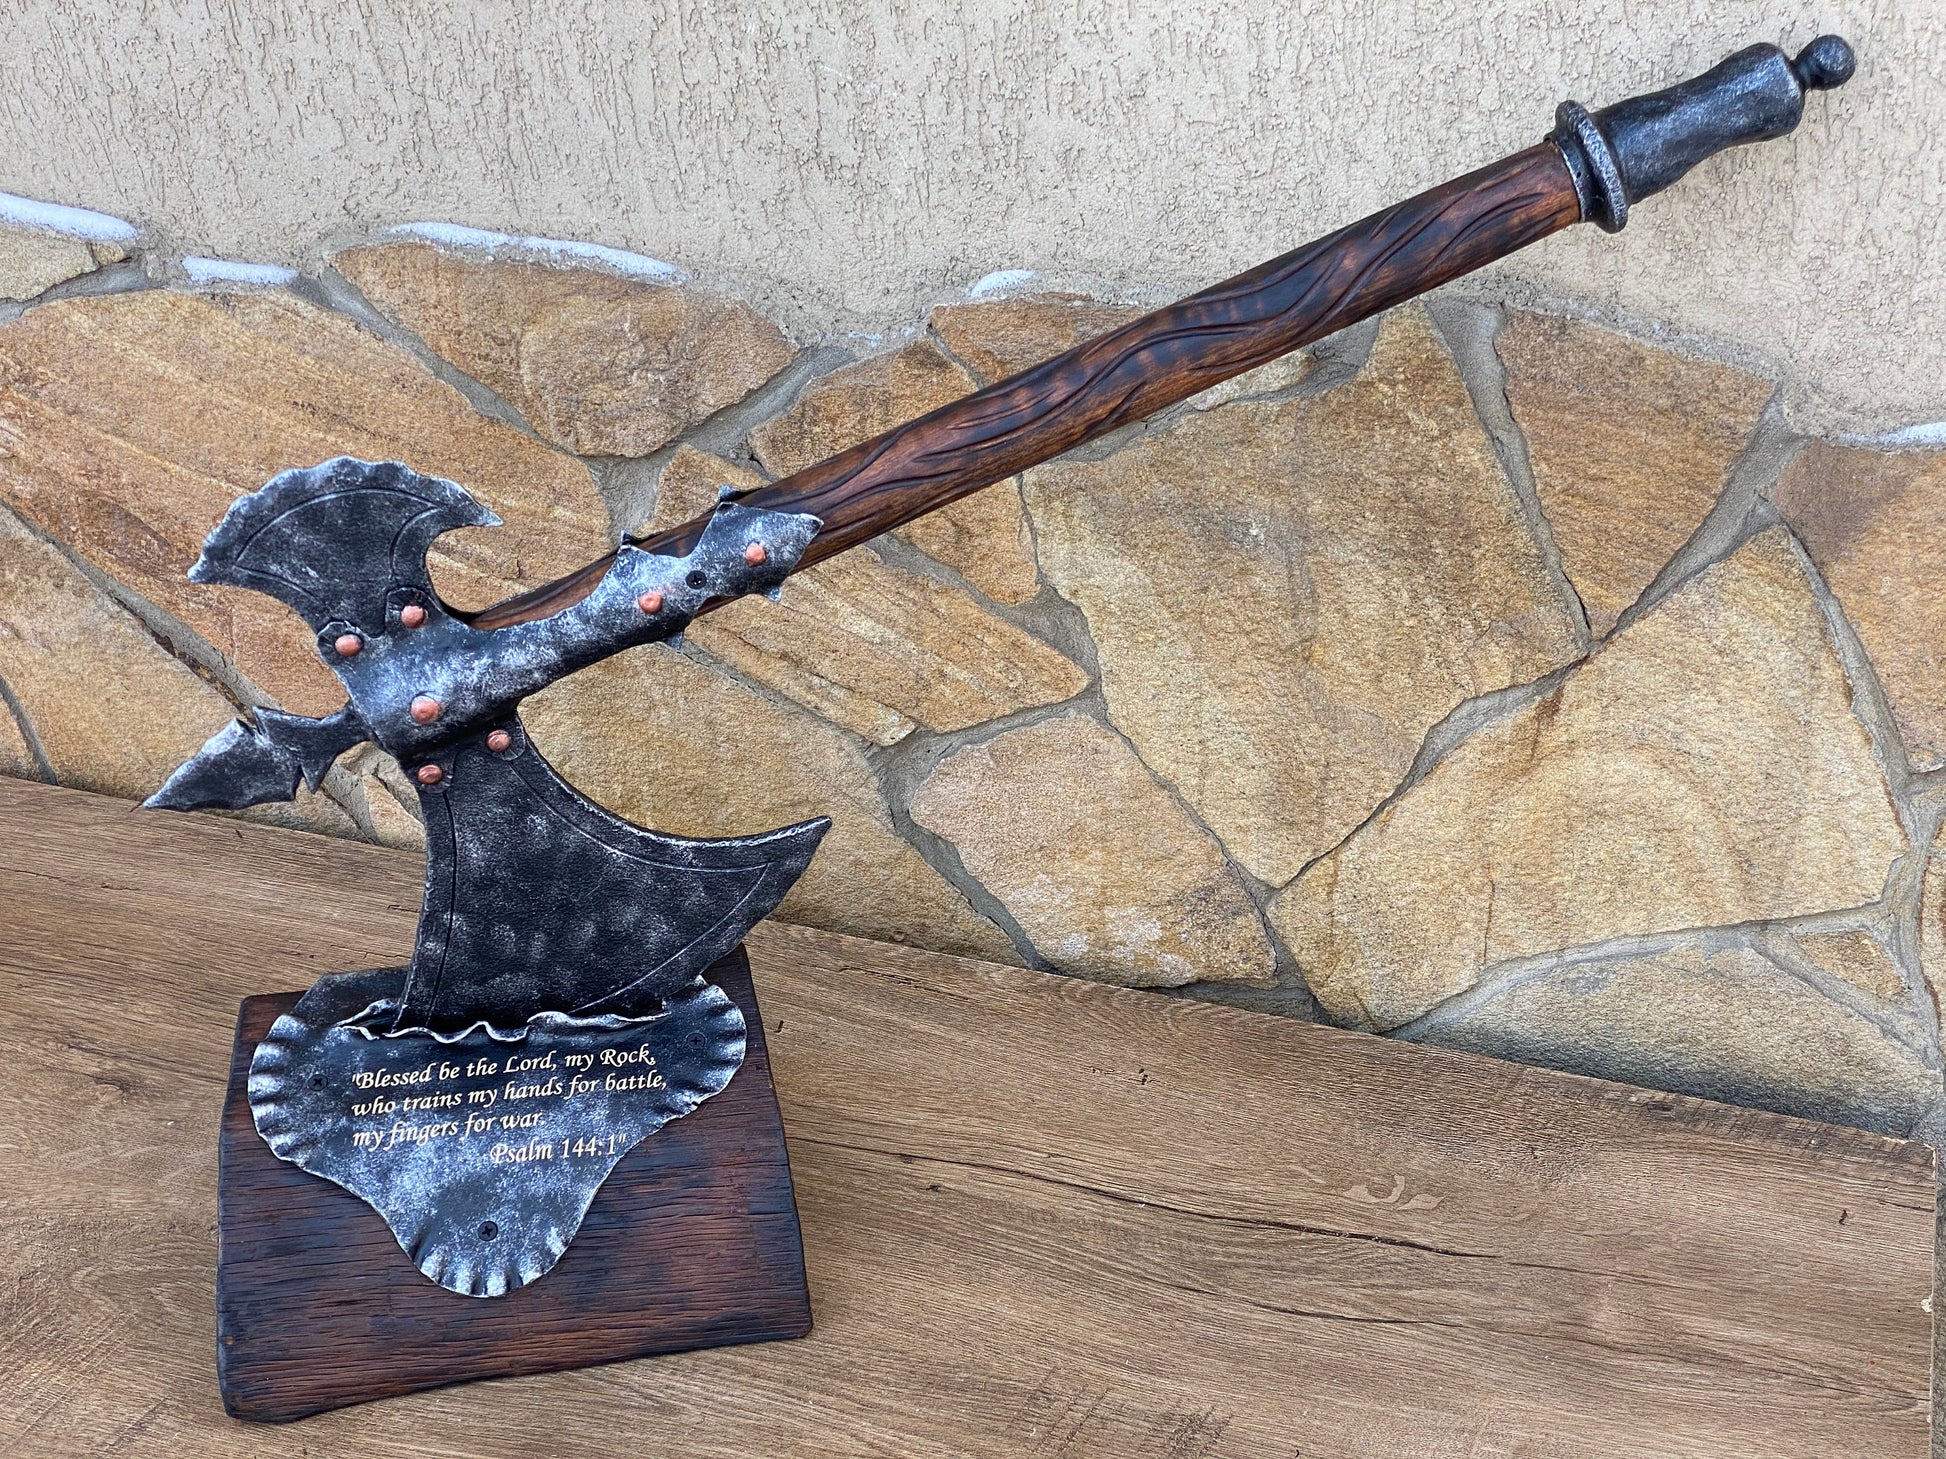 Axe holder, axe stand, viking axe, medieval decor, personalized gift, engraved gift, iron gift, wooden gift,  gift for him, gift for men